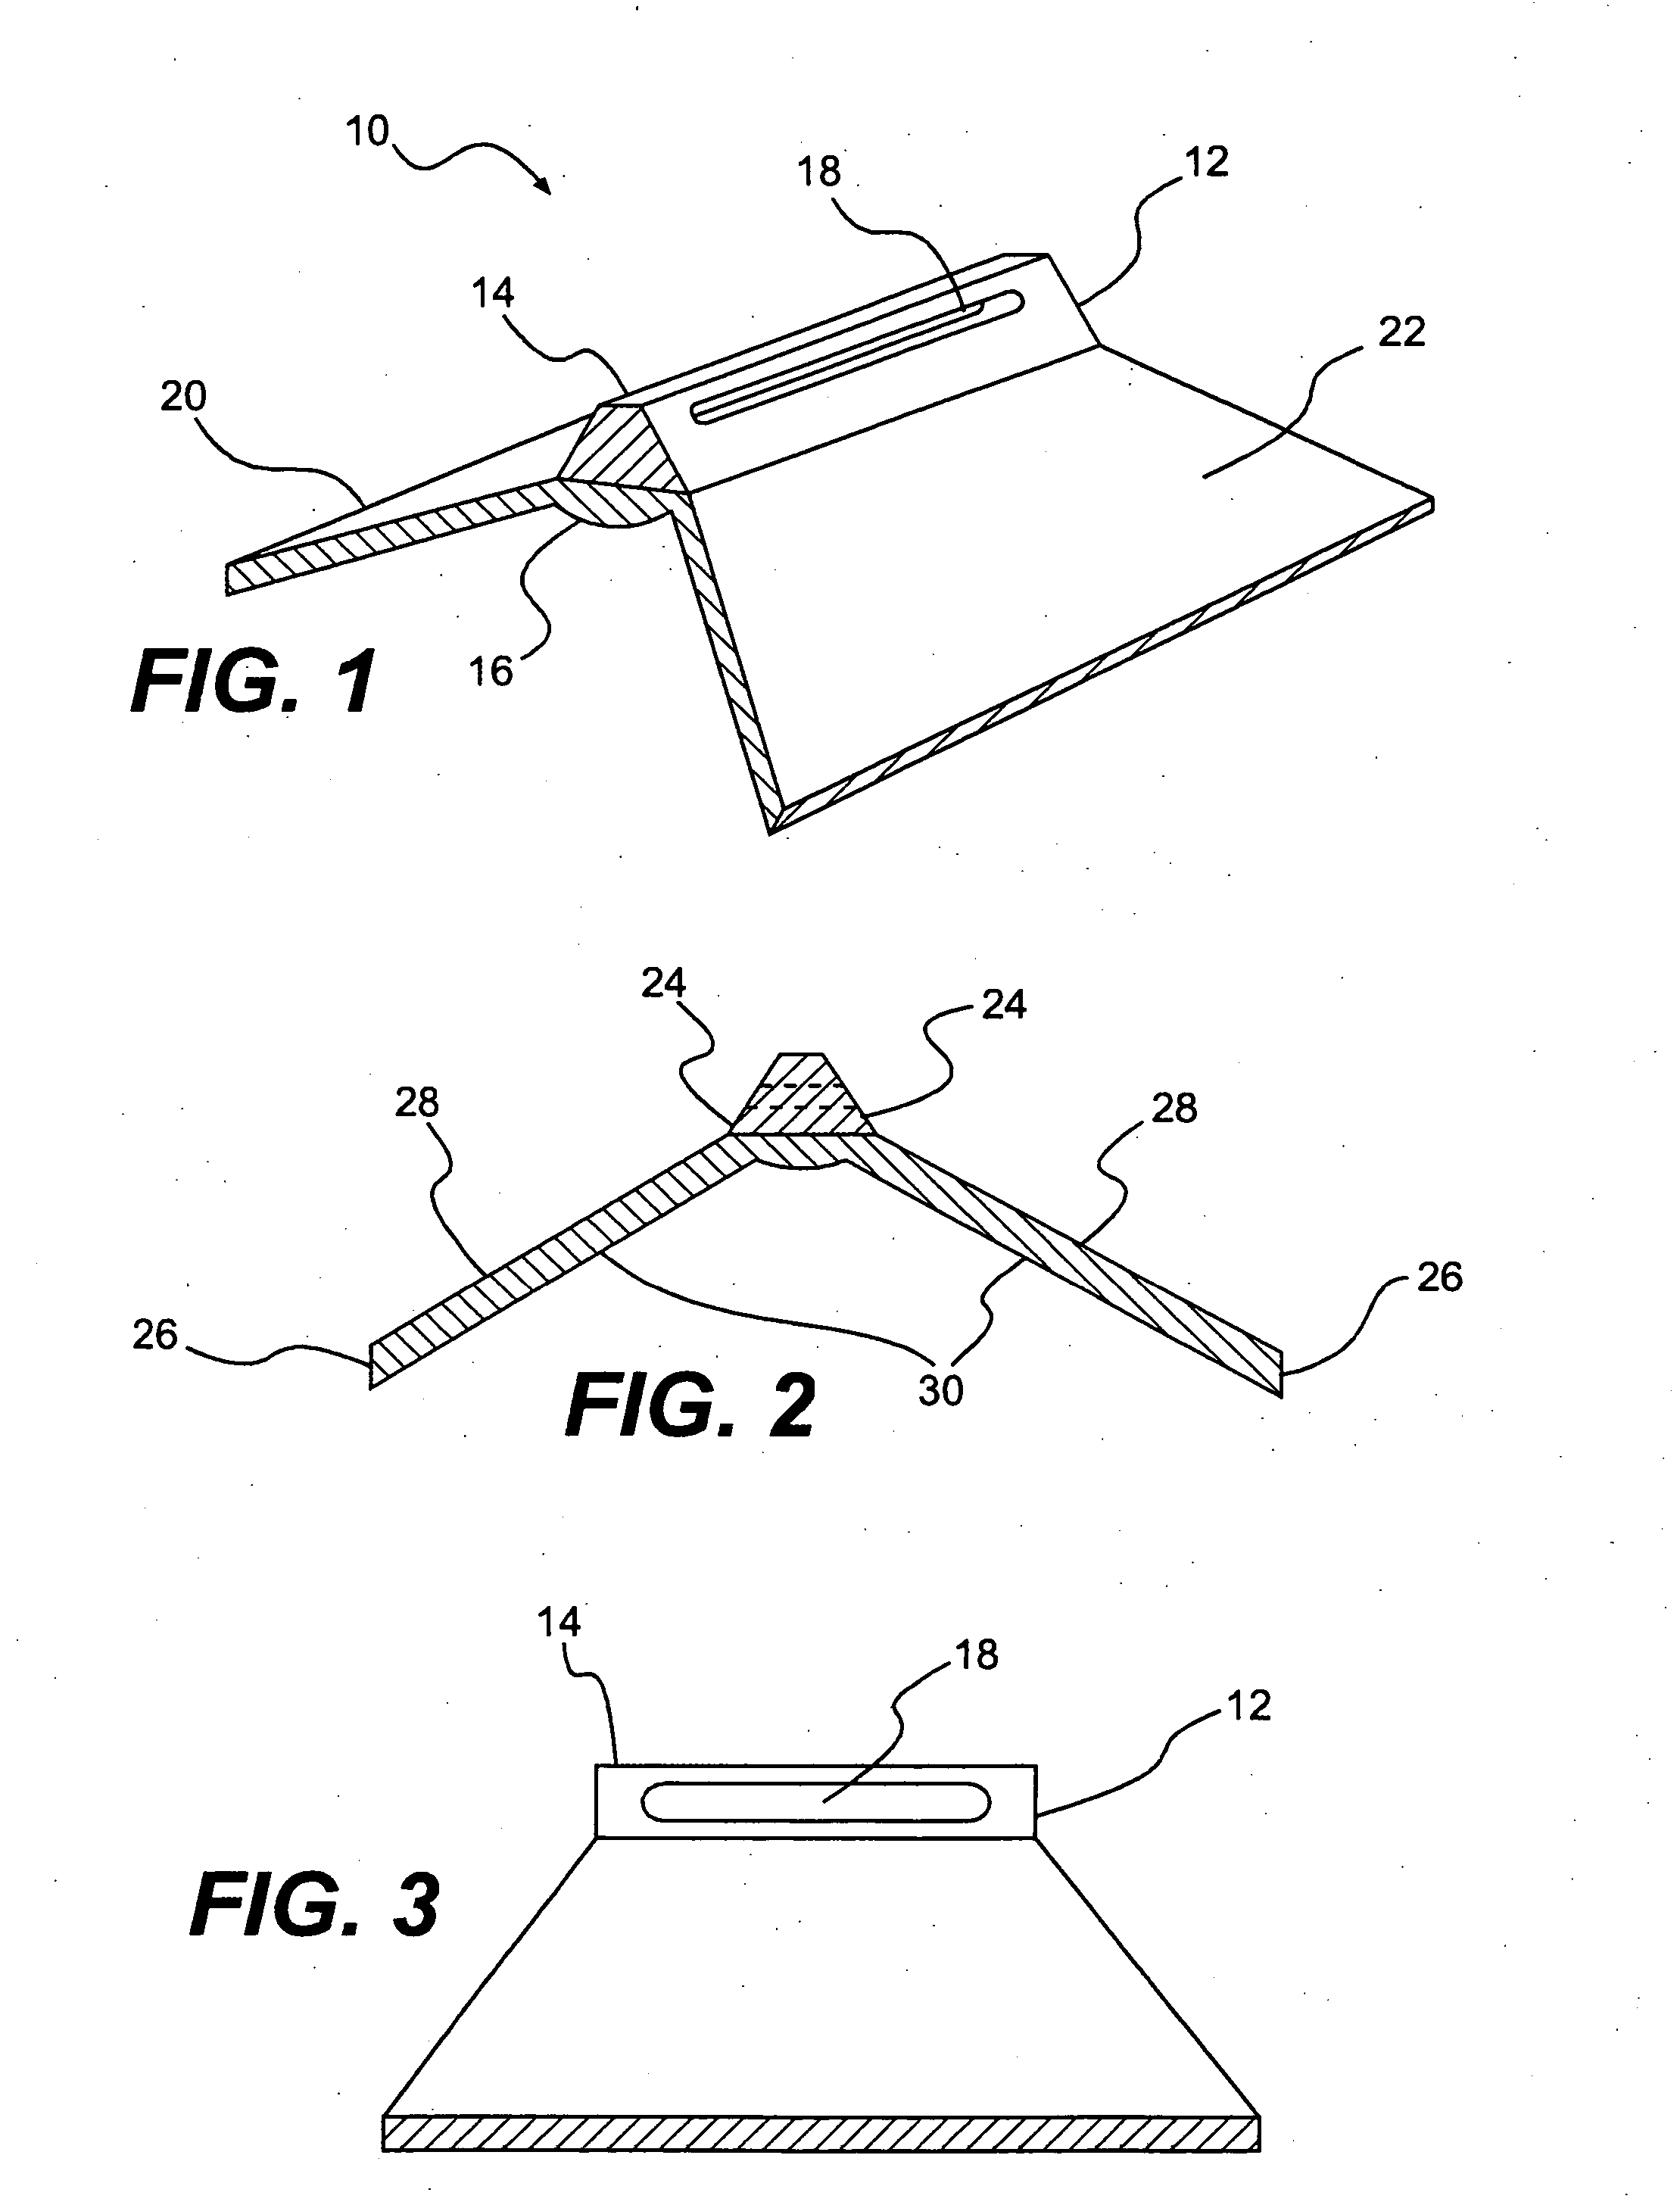 Methods and devices for spinal disc annulus reconstruction and repair